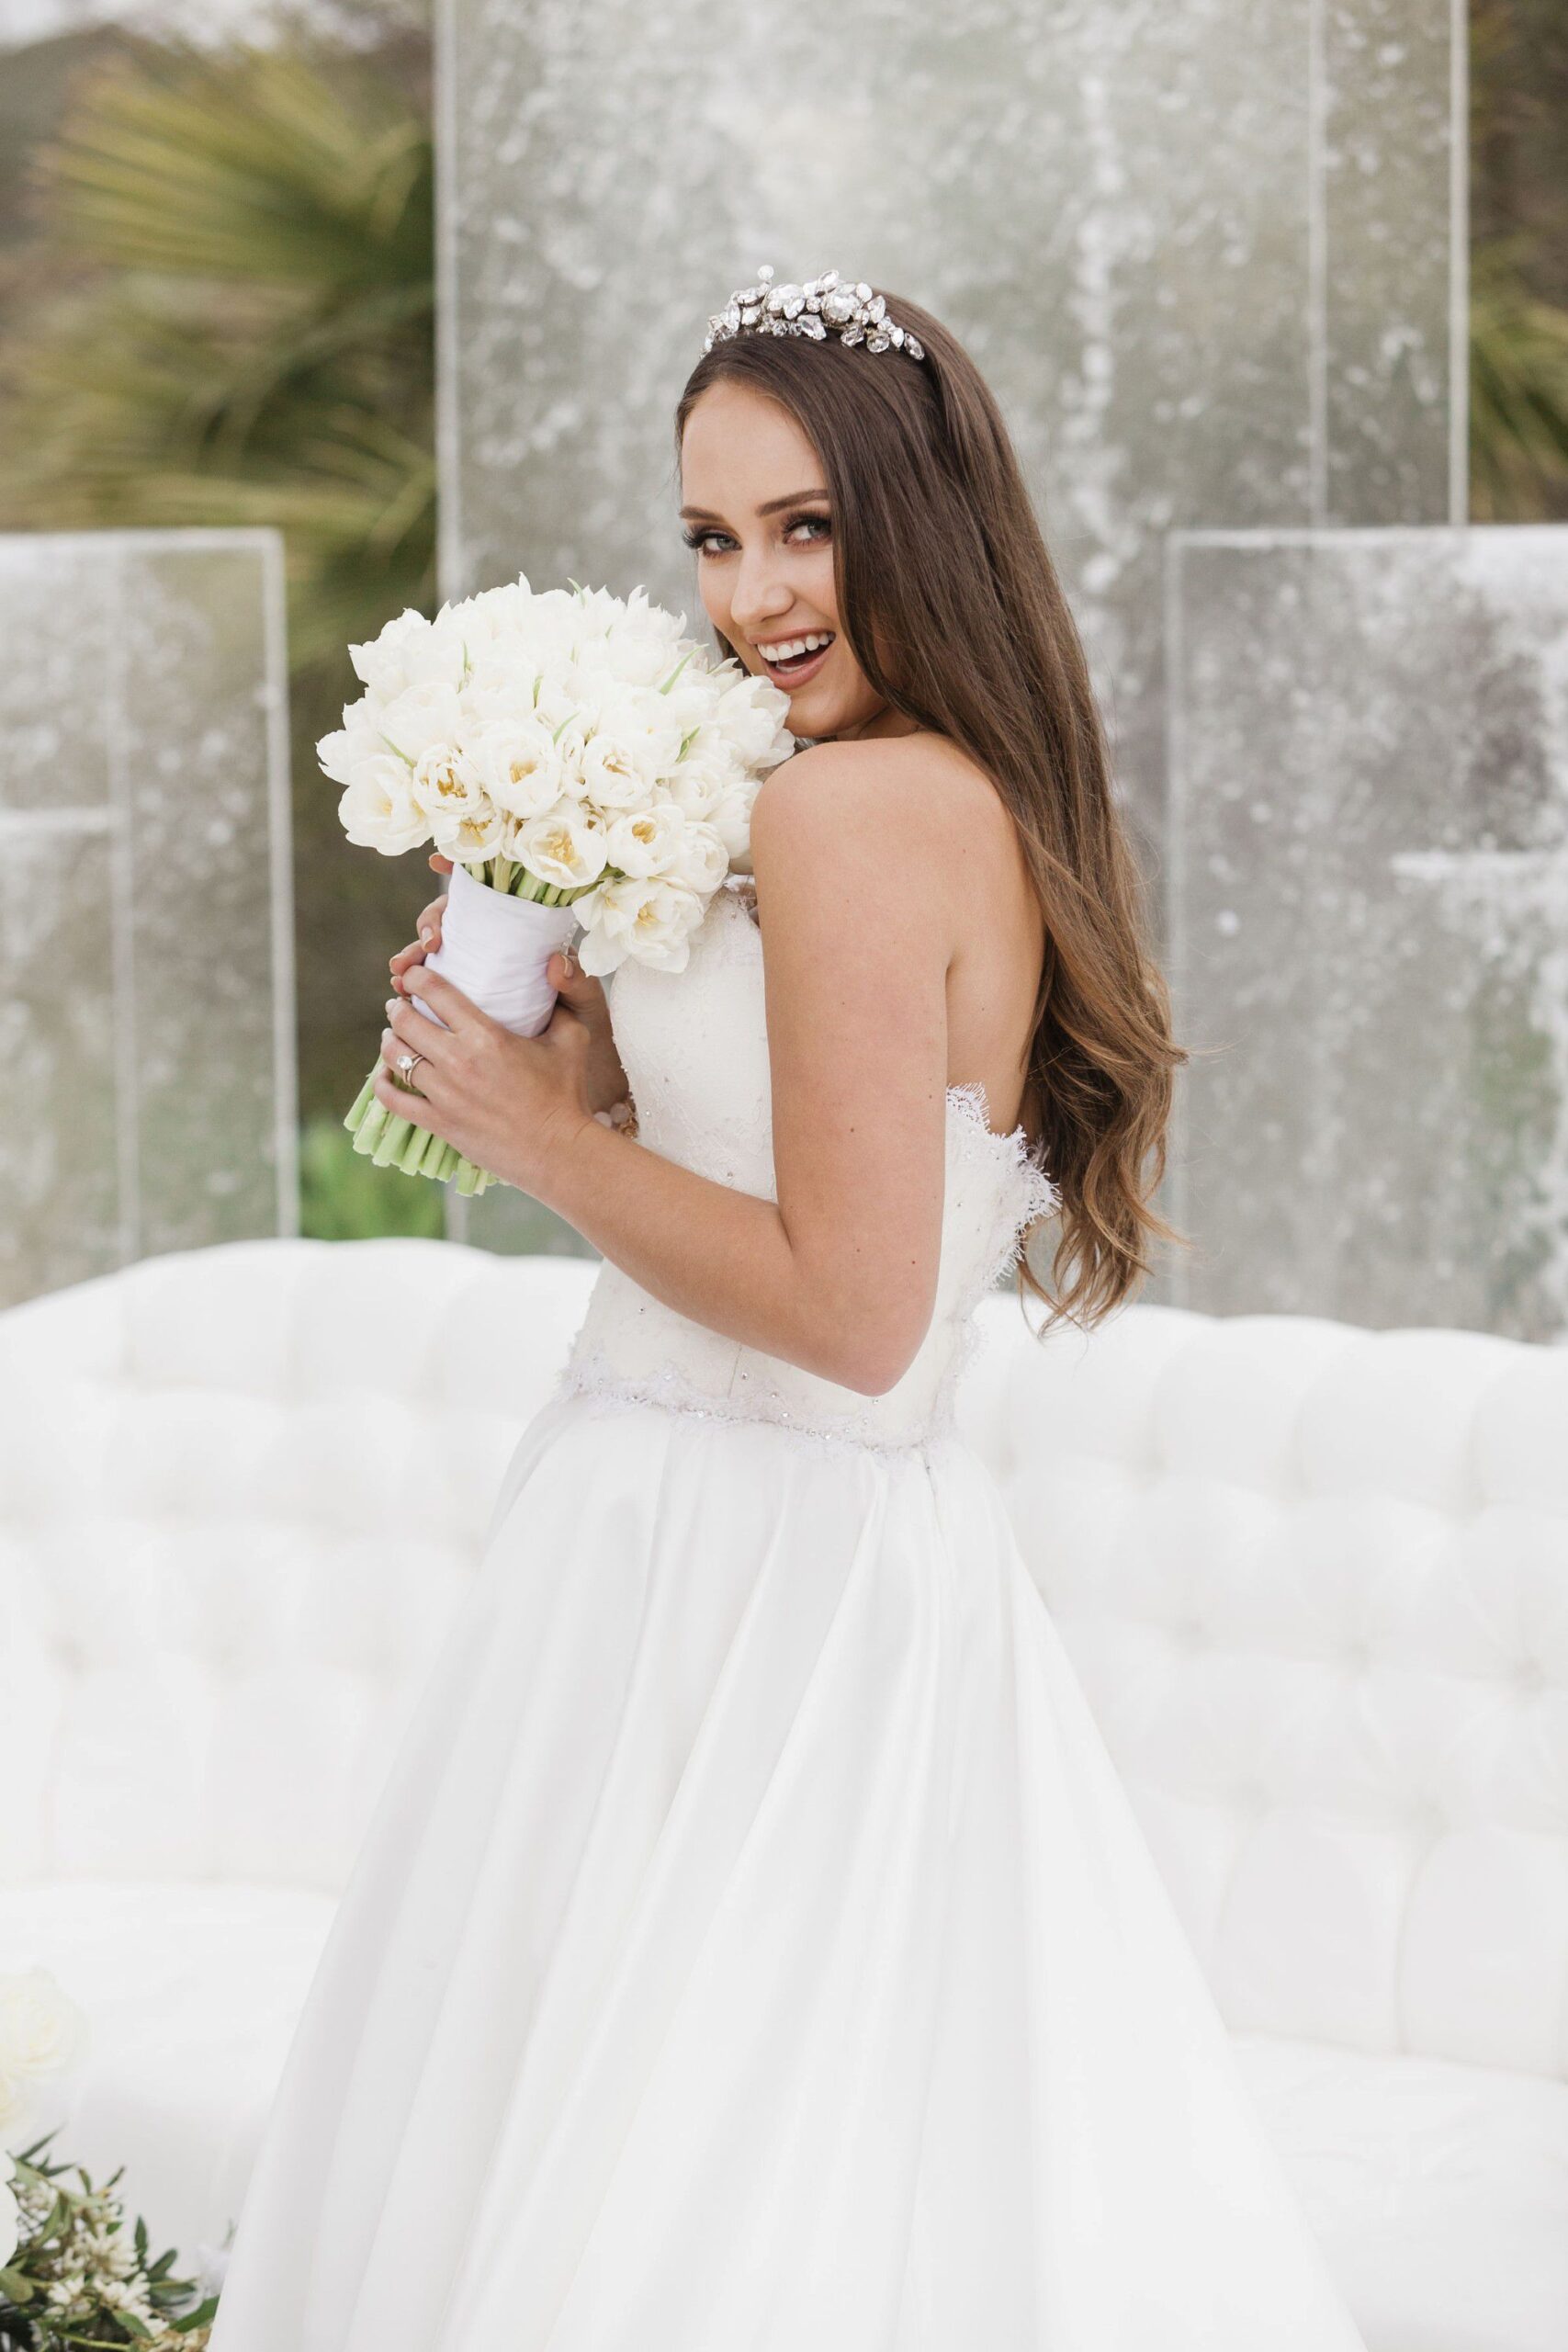 Bride hold white roses bouquet